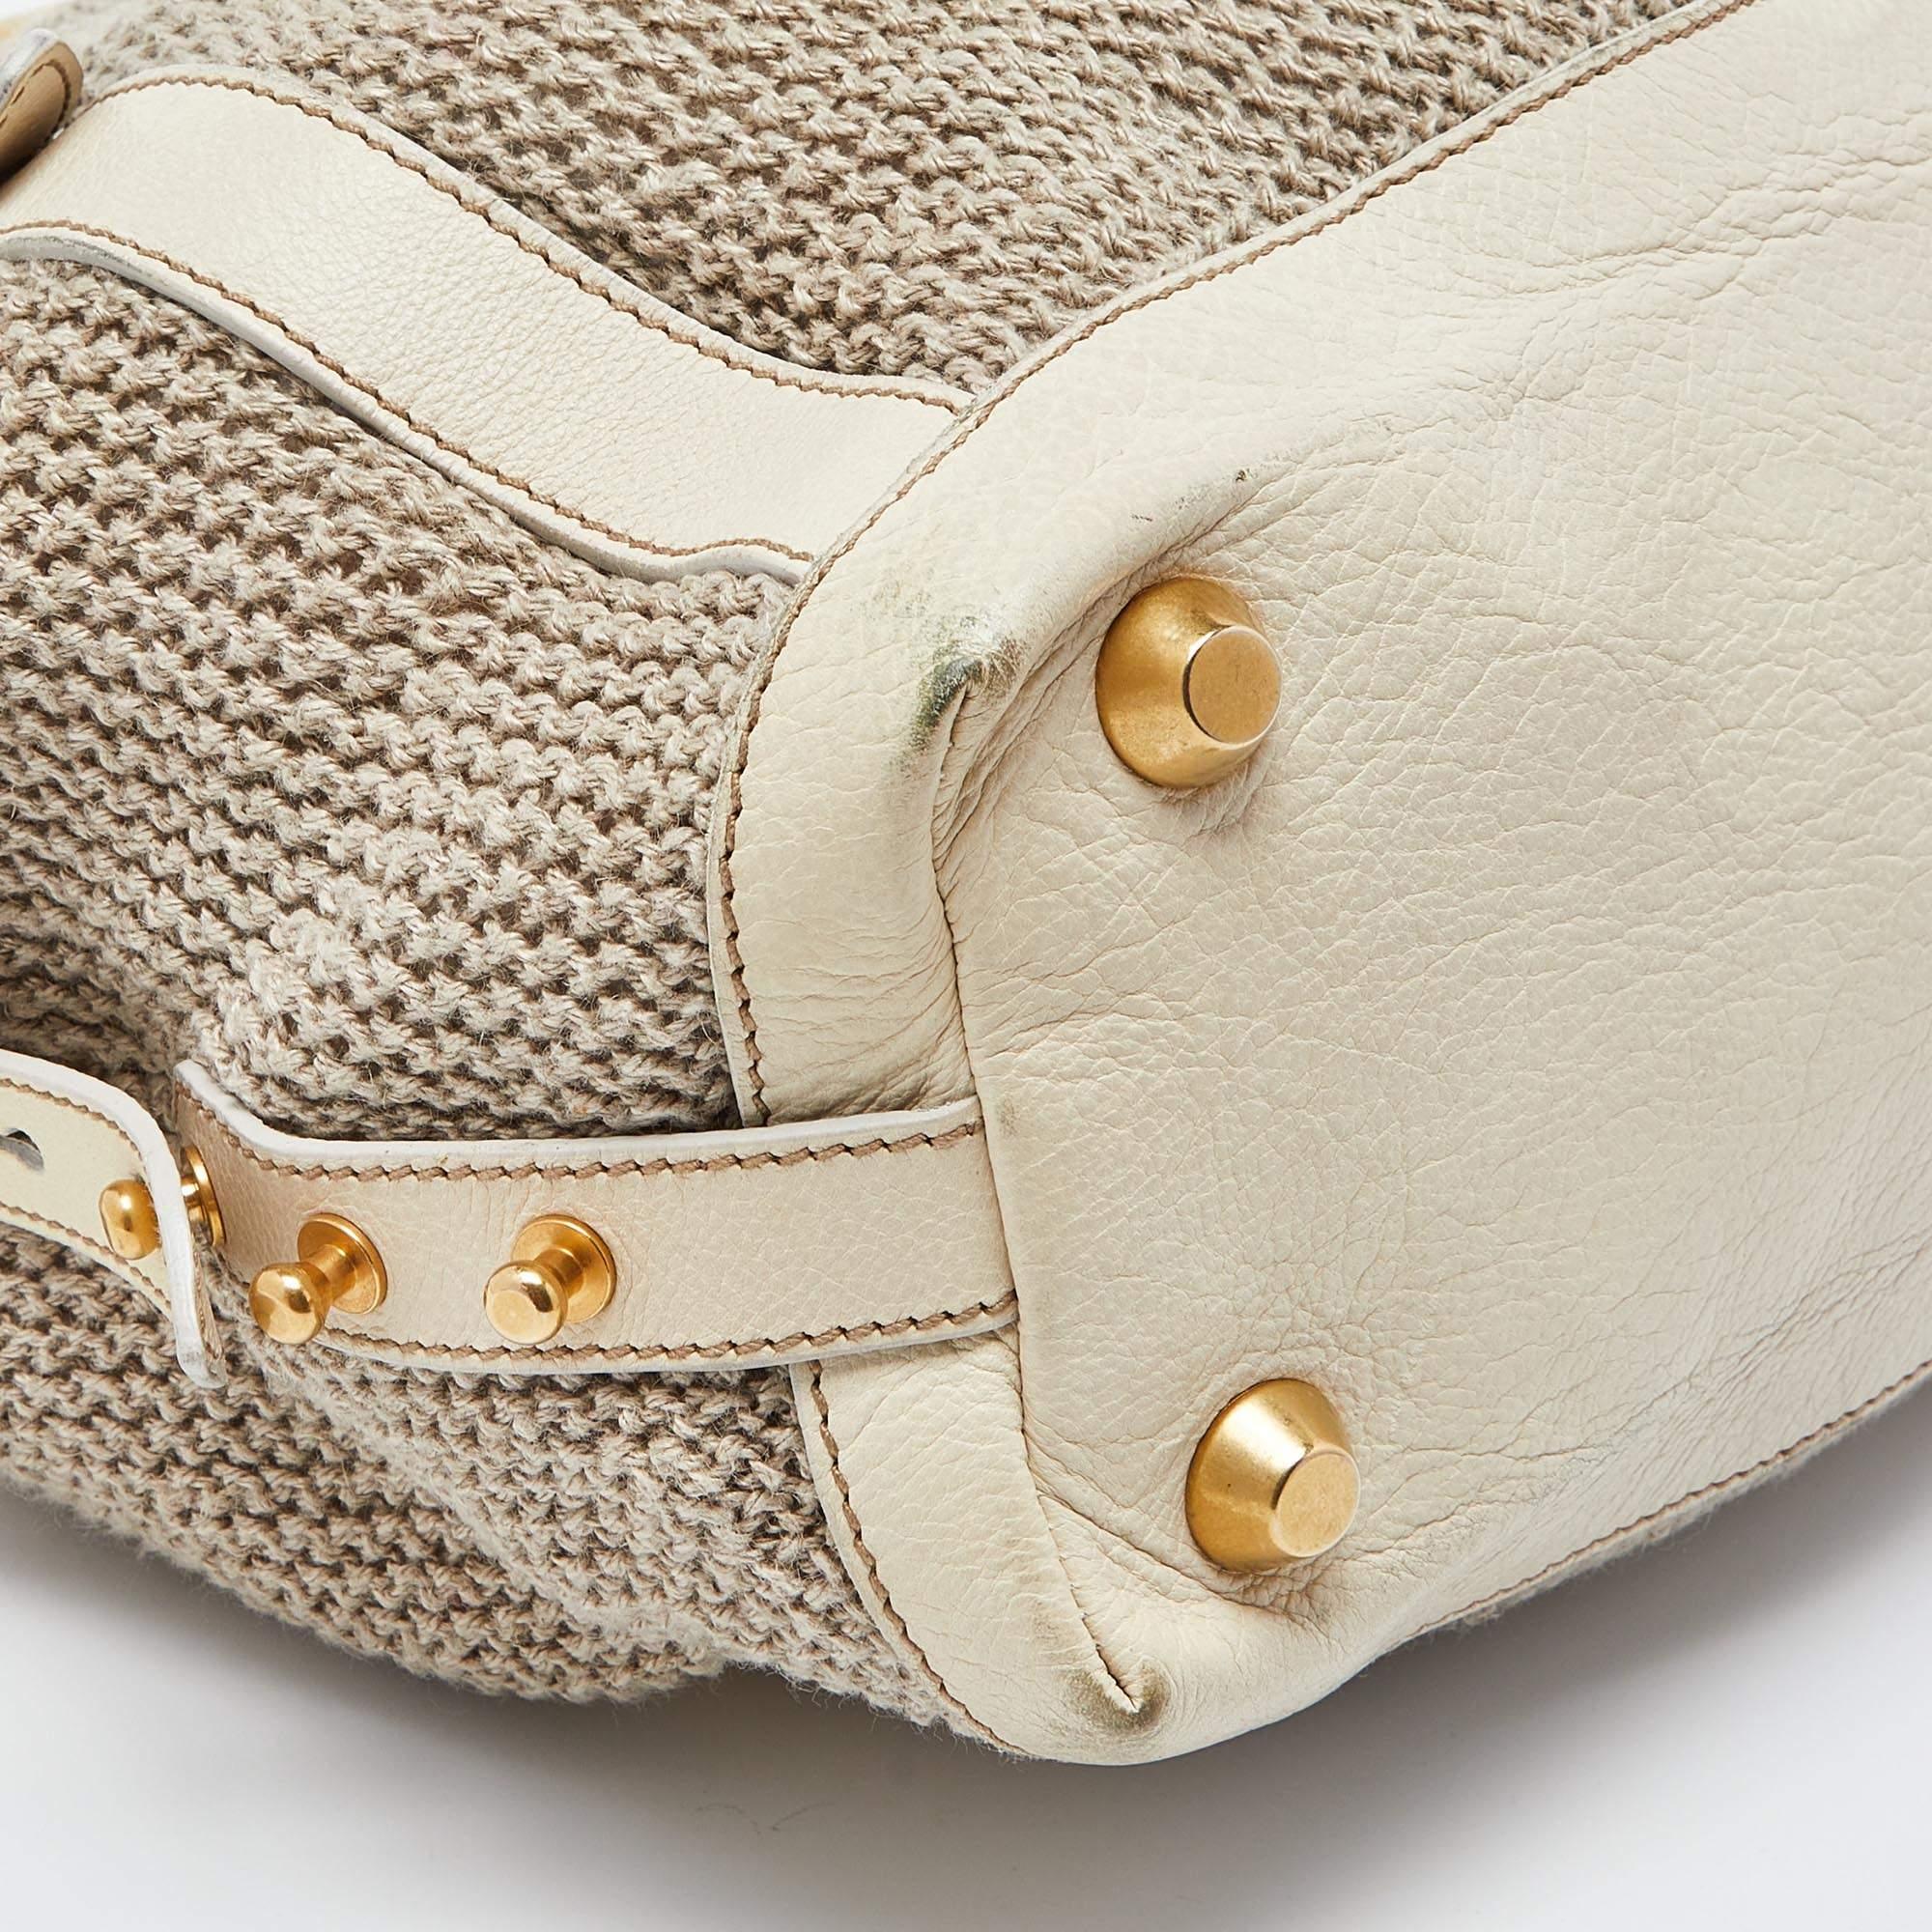 Miu Miu Cream Woven Fabric and Leather Satchel For Sale 3